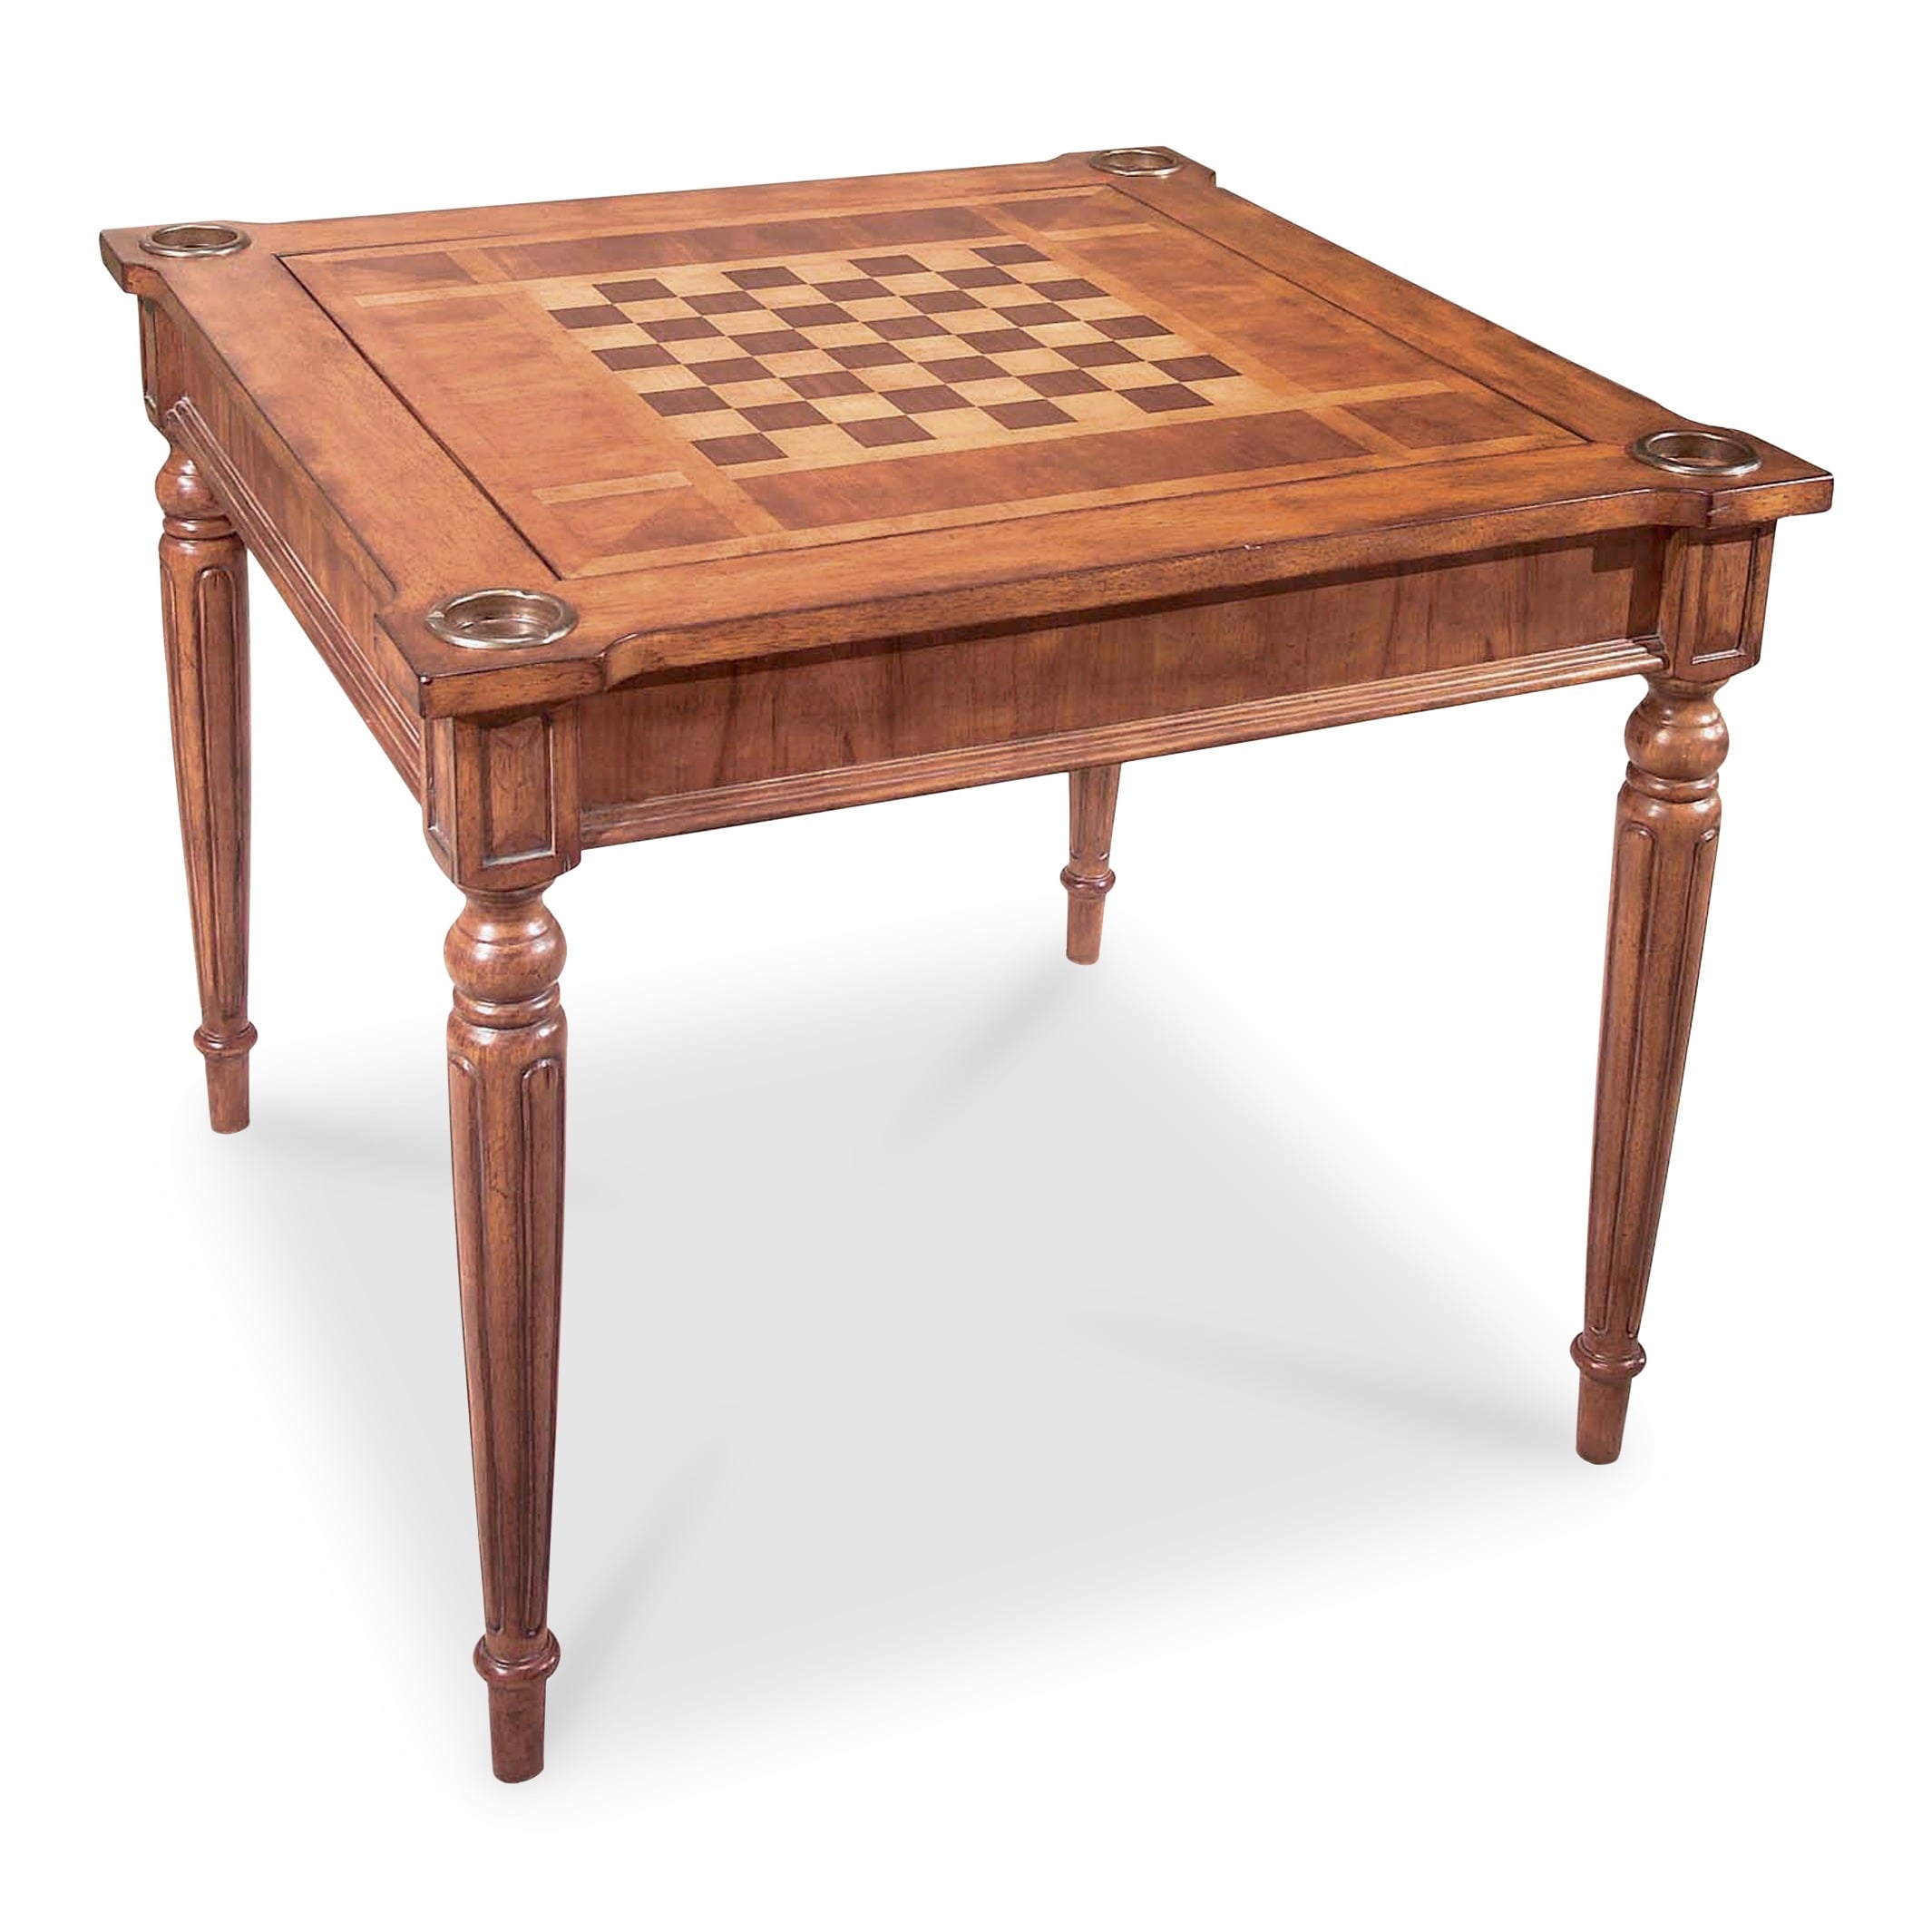 Shop Handmade Chess Checkers Game Table China Overstock 8238483,How Long Are Britax Car Seats Good For